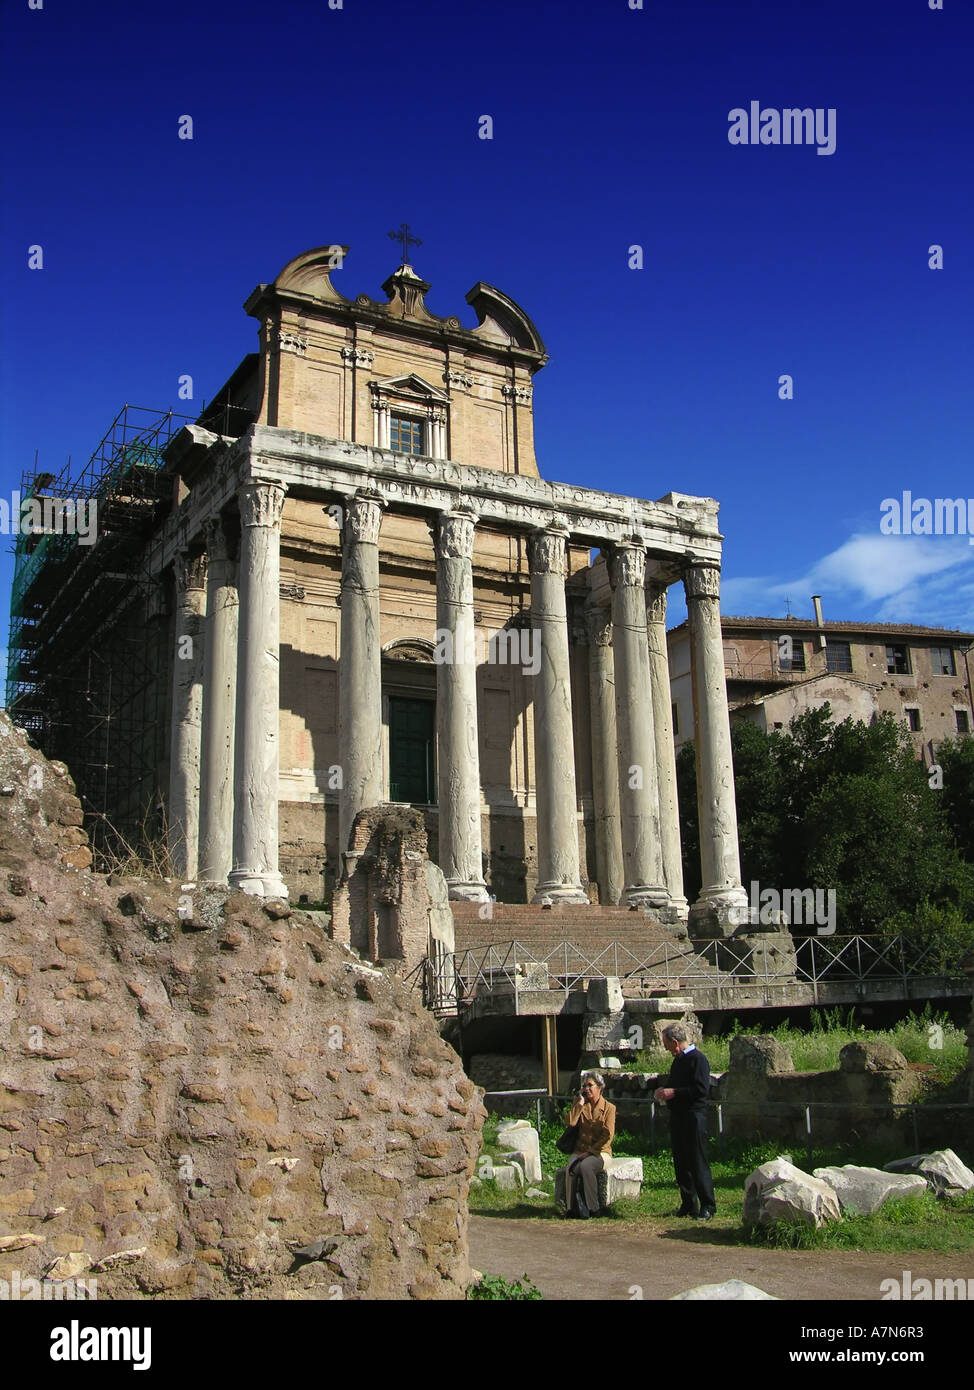 Temple of Antoninus and Faustina, Rome, Italy Stock Photo